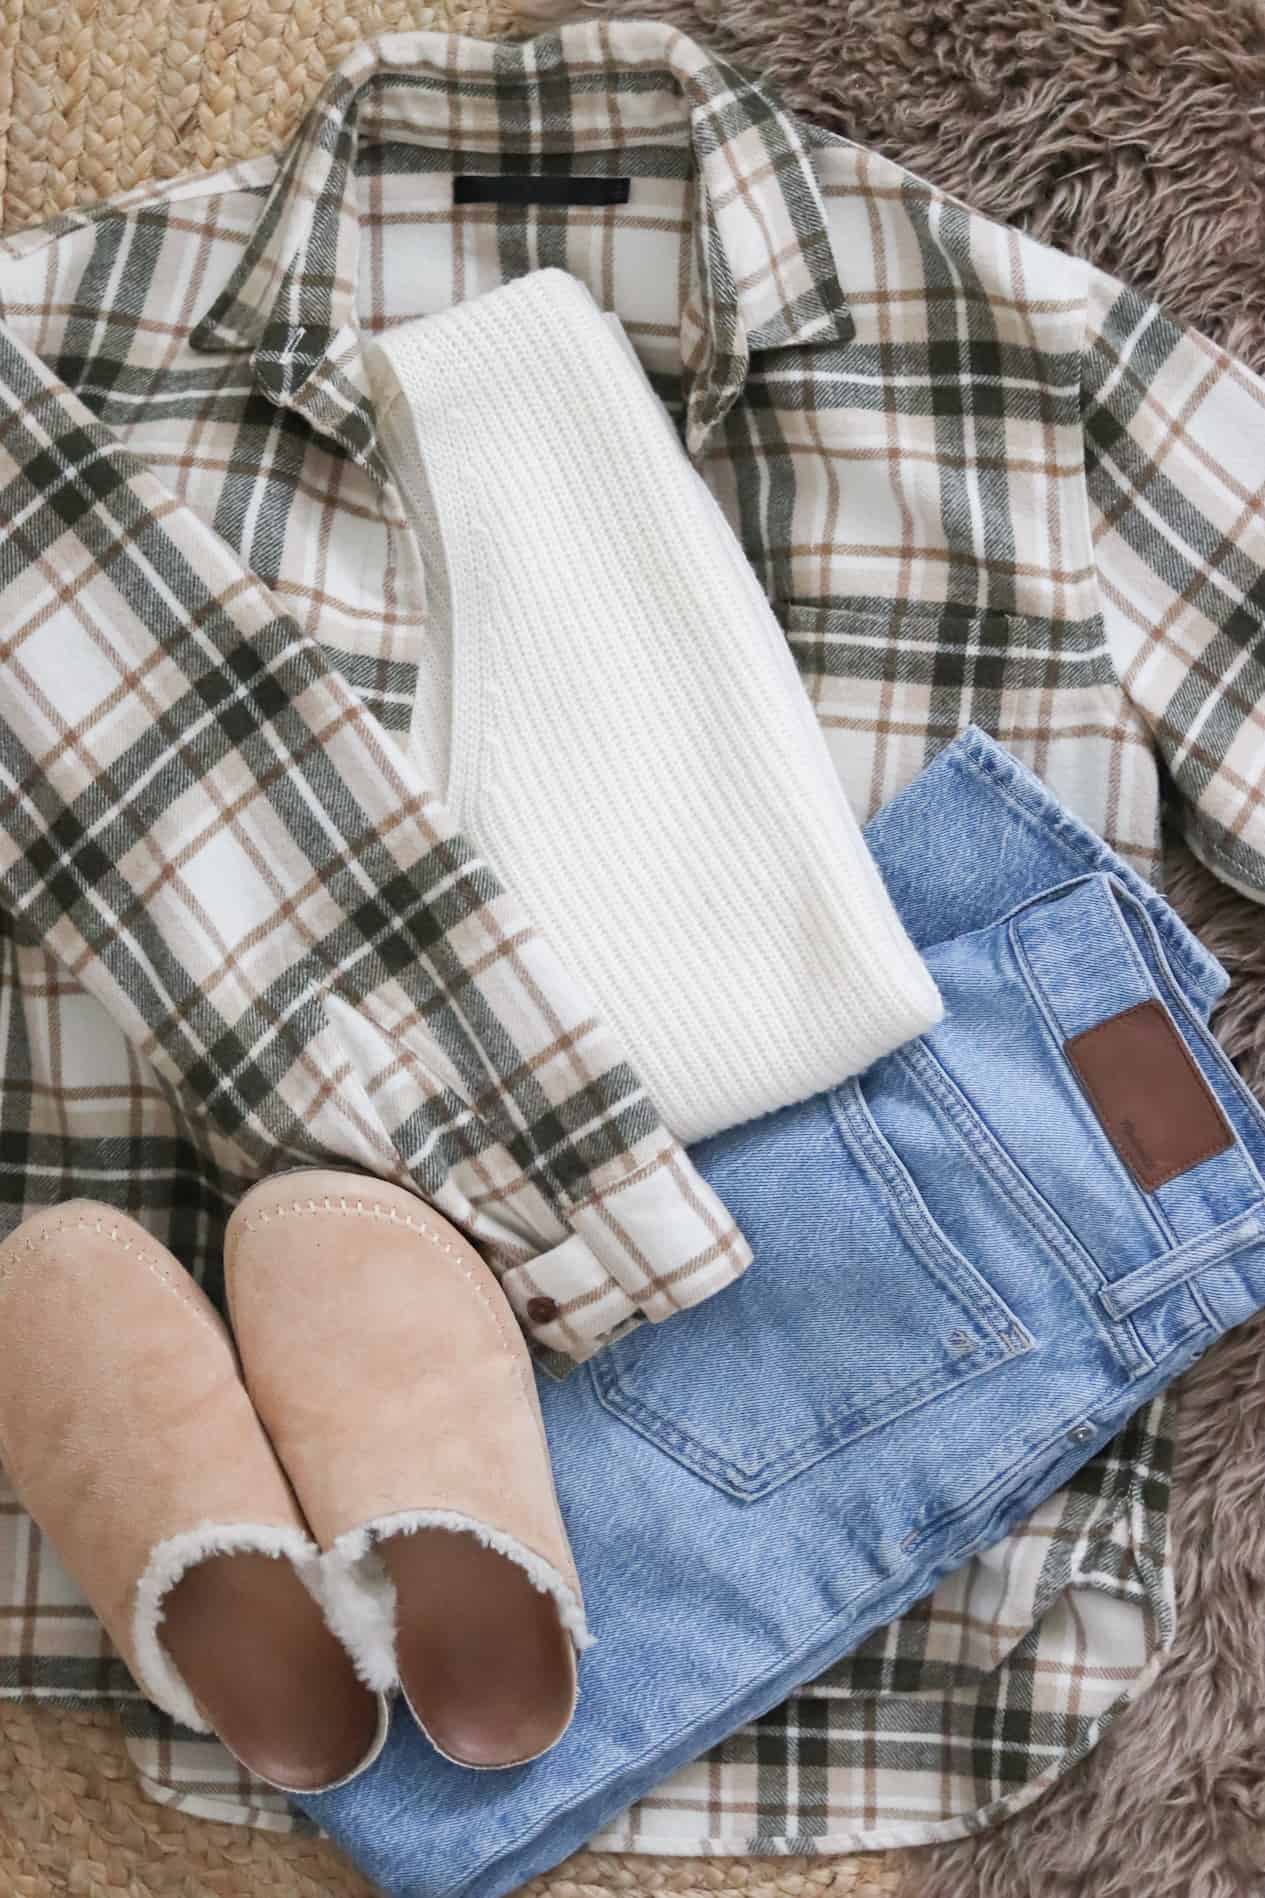 Flat lay of a flannel white sweater, jeans and cozy slippers.